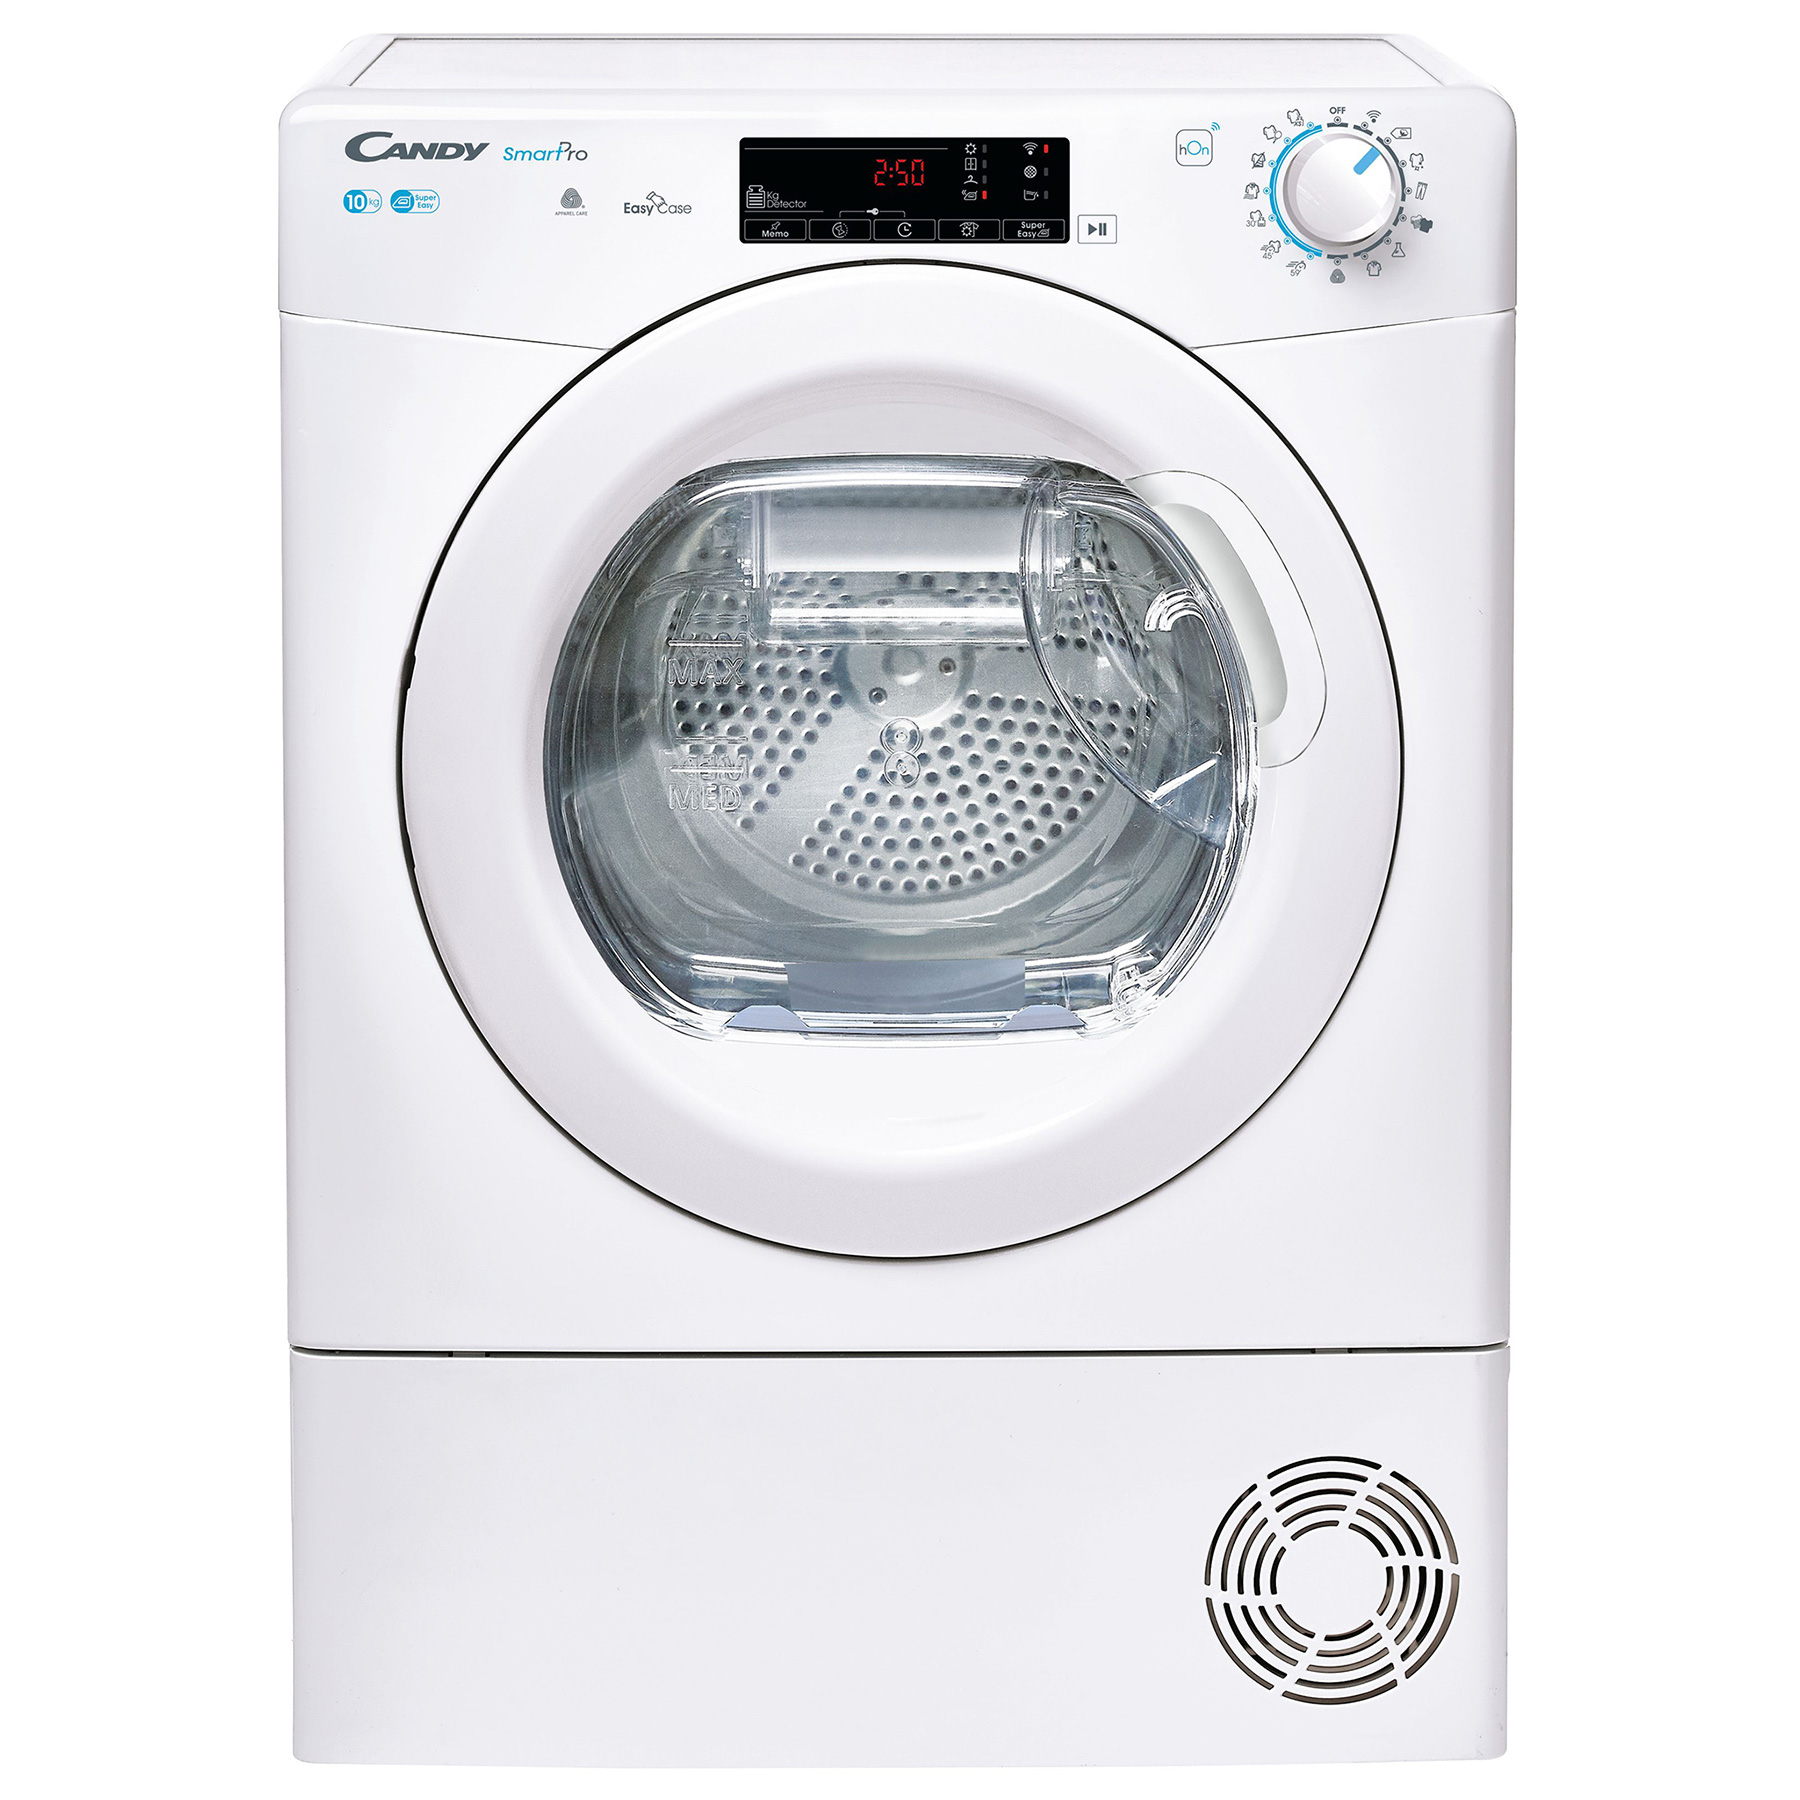 Image of Candy CSOEC10TE 10kg Condenser Dryer in White B Rated EasyCase Wi Fi